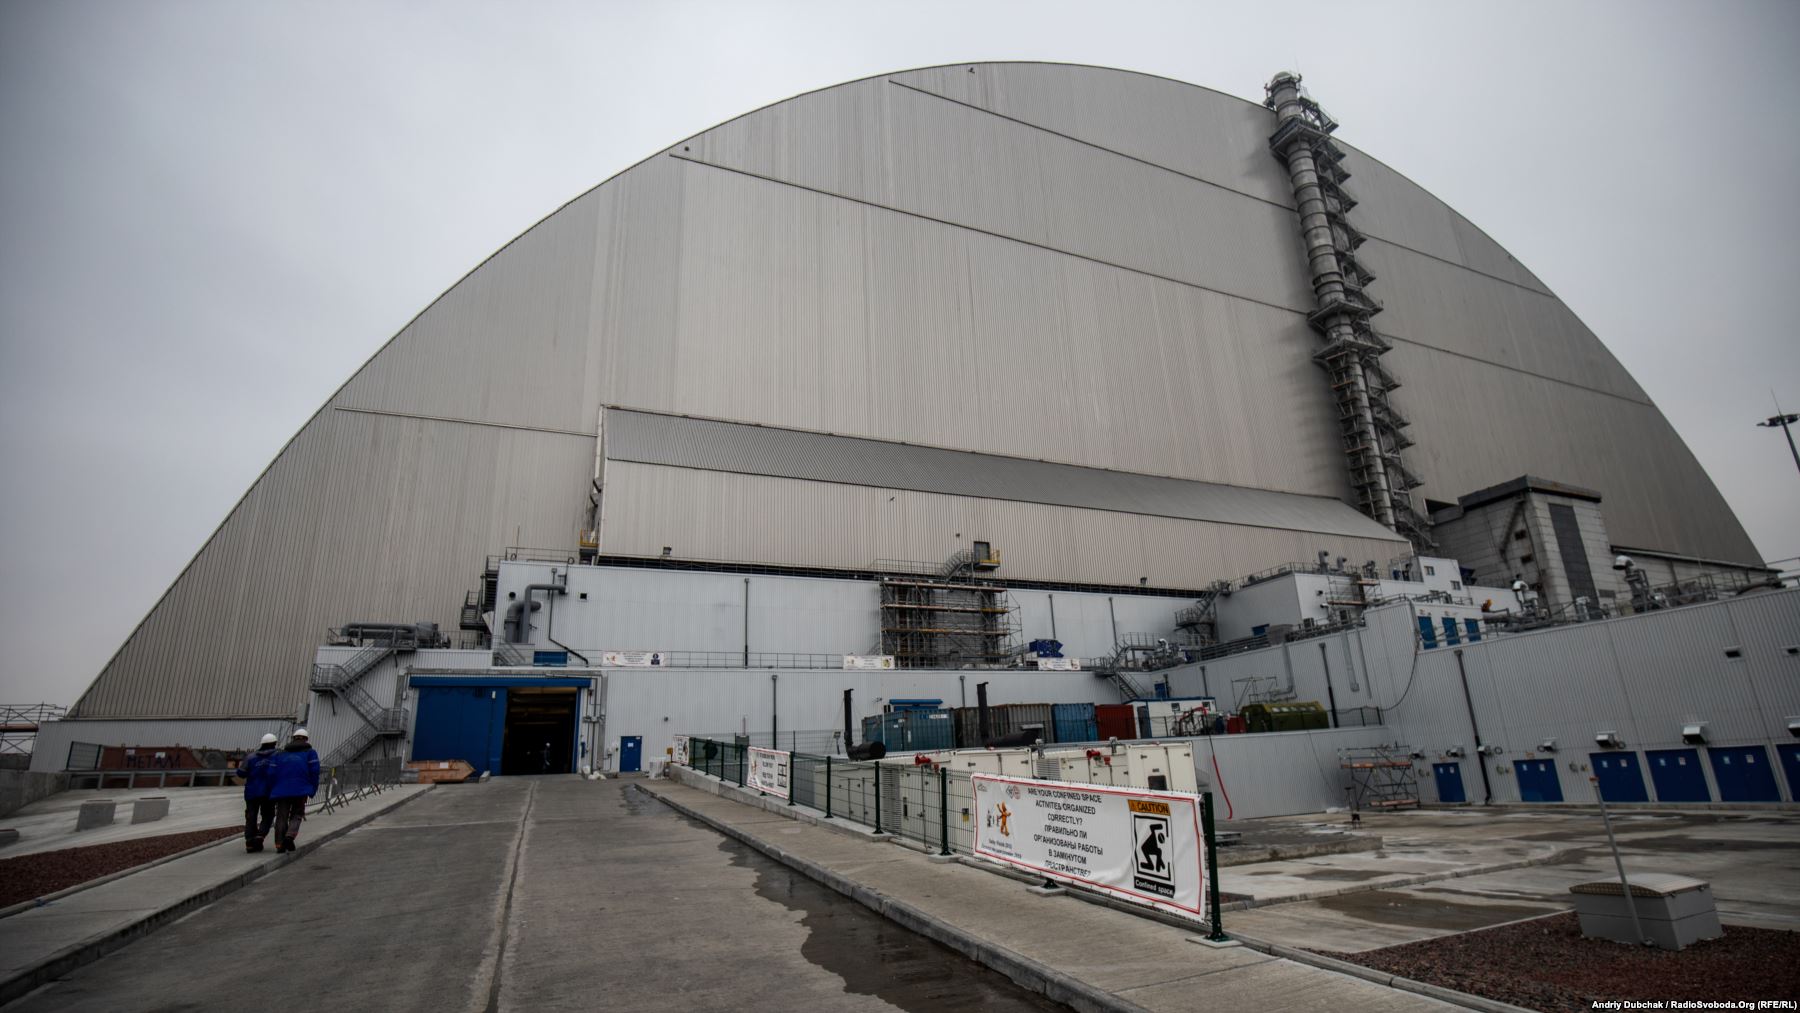 The New Safe Confinement (NSC) was designed to prevent further radiation leaks from Ukraine's stricken Chernobyl nuclear power plant. It took two weeks in November 2016 to slide the massive steel structure into position. At a height of 109 meters and a length of 257 meters, the shield is the world’s largest movable metal structure. It covers the crumbling concrete sarcophagus that encased Chernobyl's reactor number four where an explosion in April 1986 spewed tons of radiation across Europe.